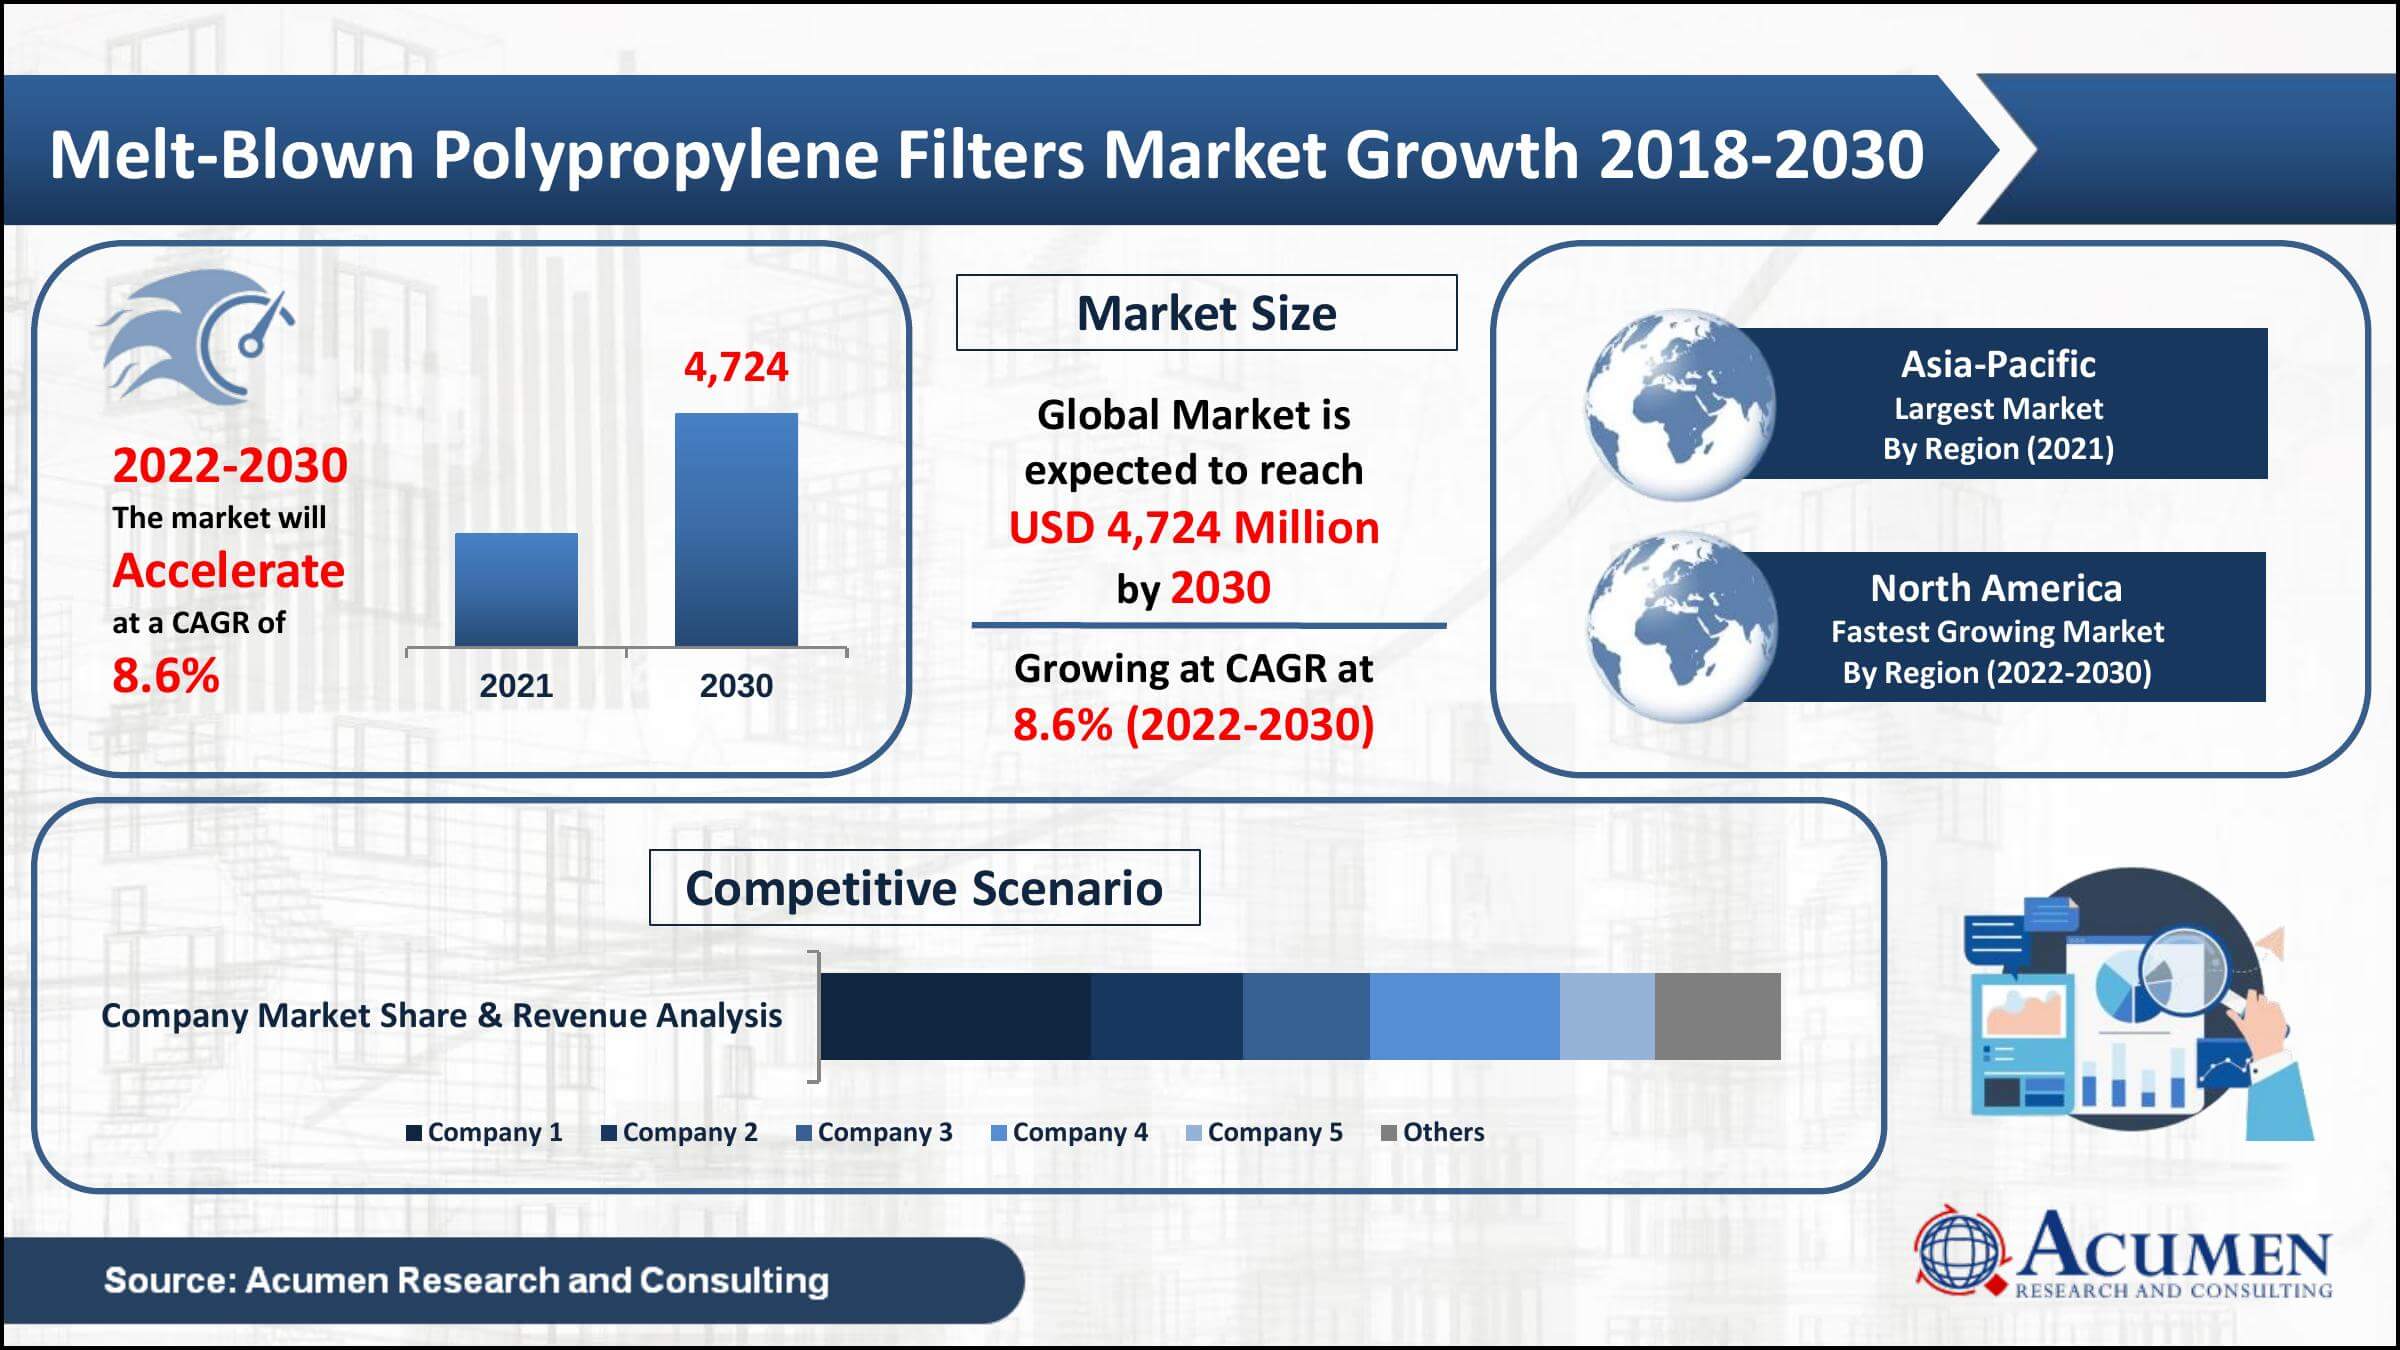 Global melt-blown polypropylene filters market value collected USD 2,291 Million in 2021, with a 8.6% CAGR between 2022 and 2030